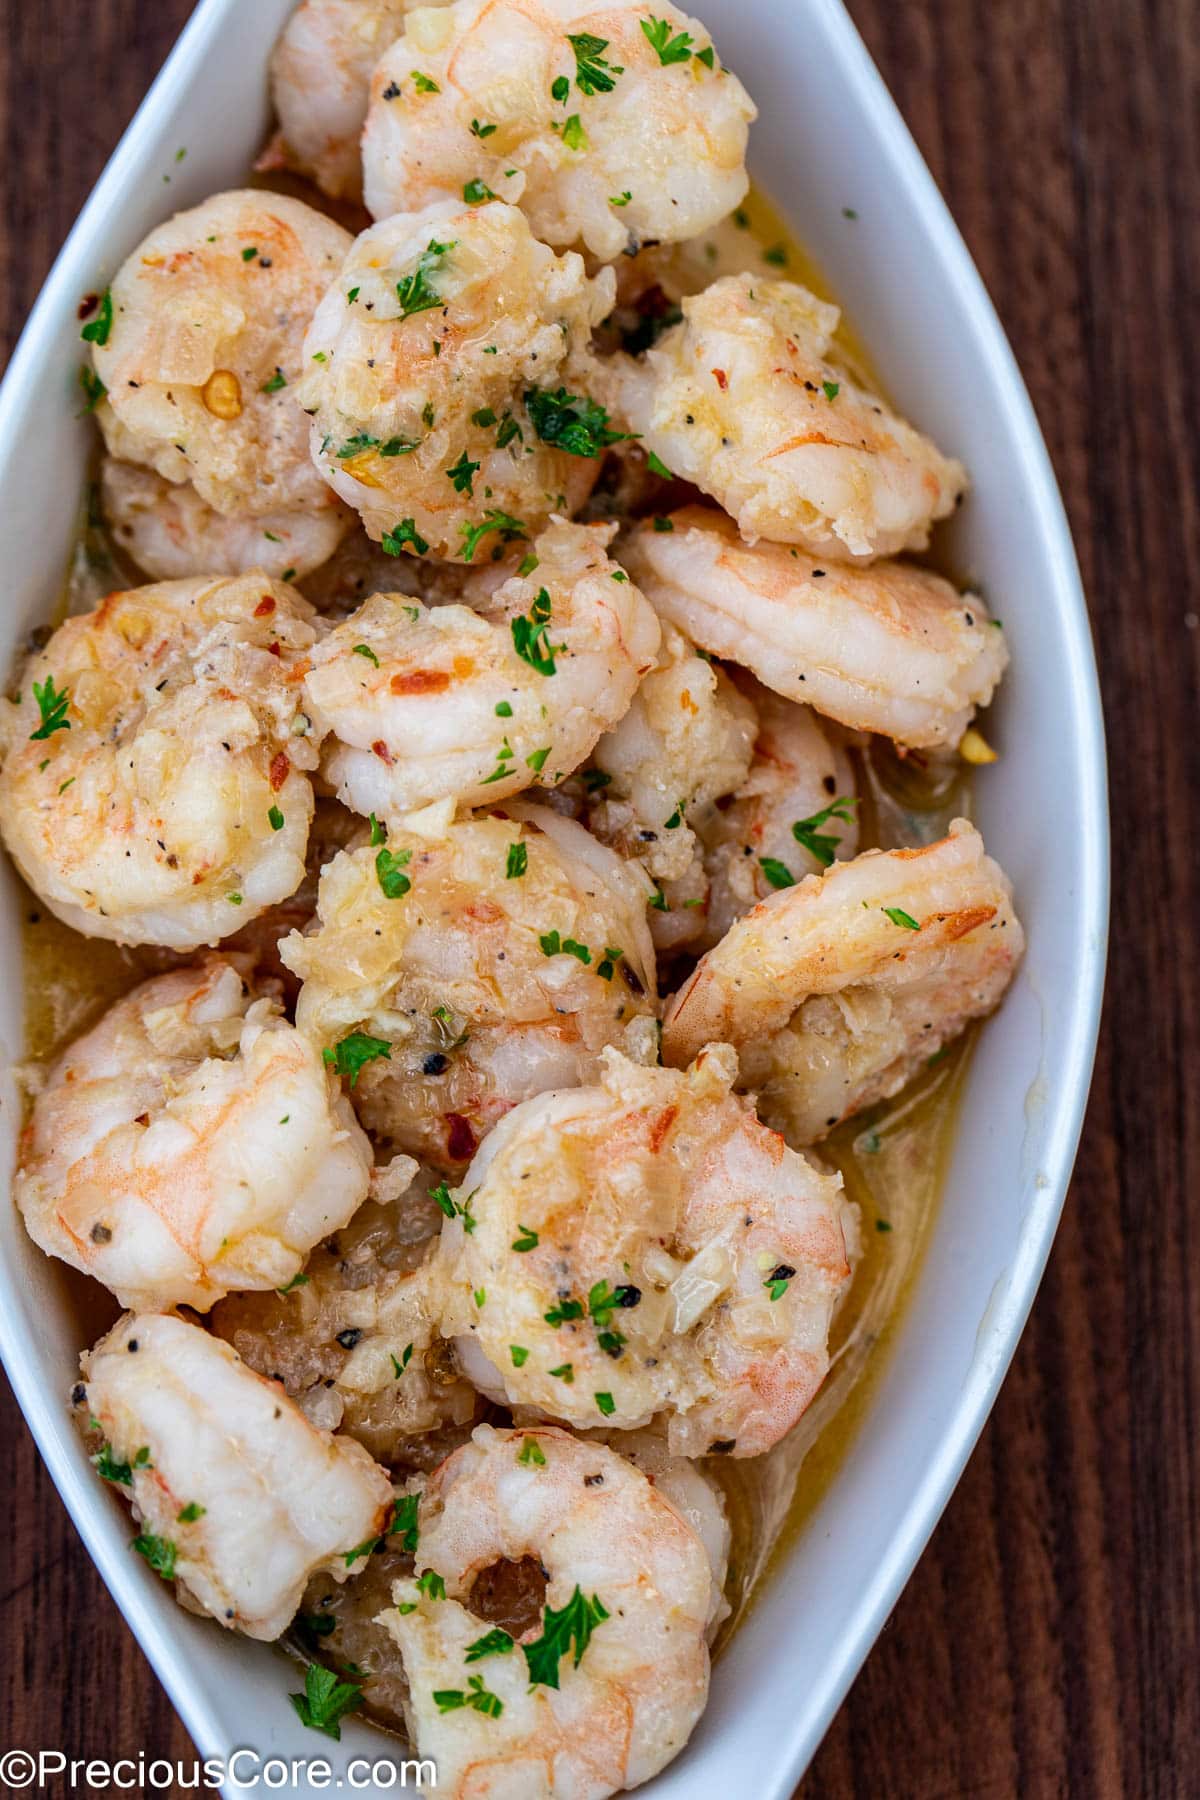 A serving of shrimp in white wine sauce.